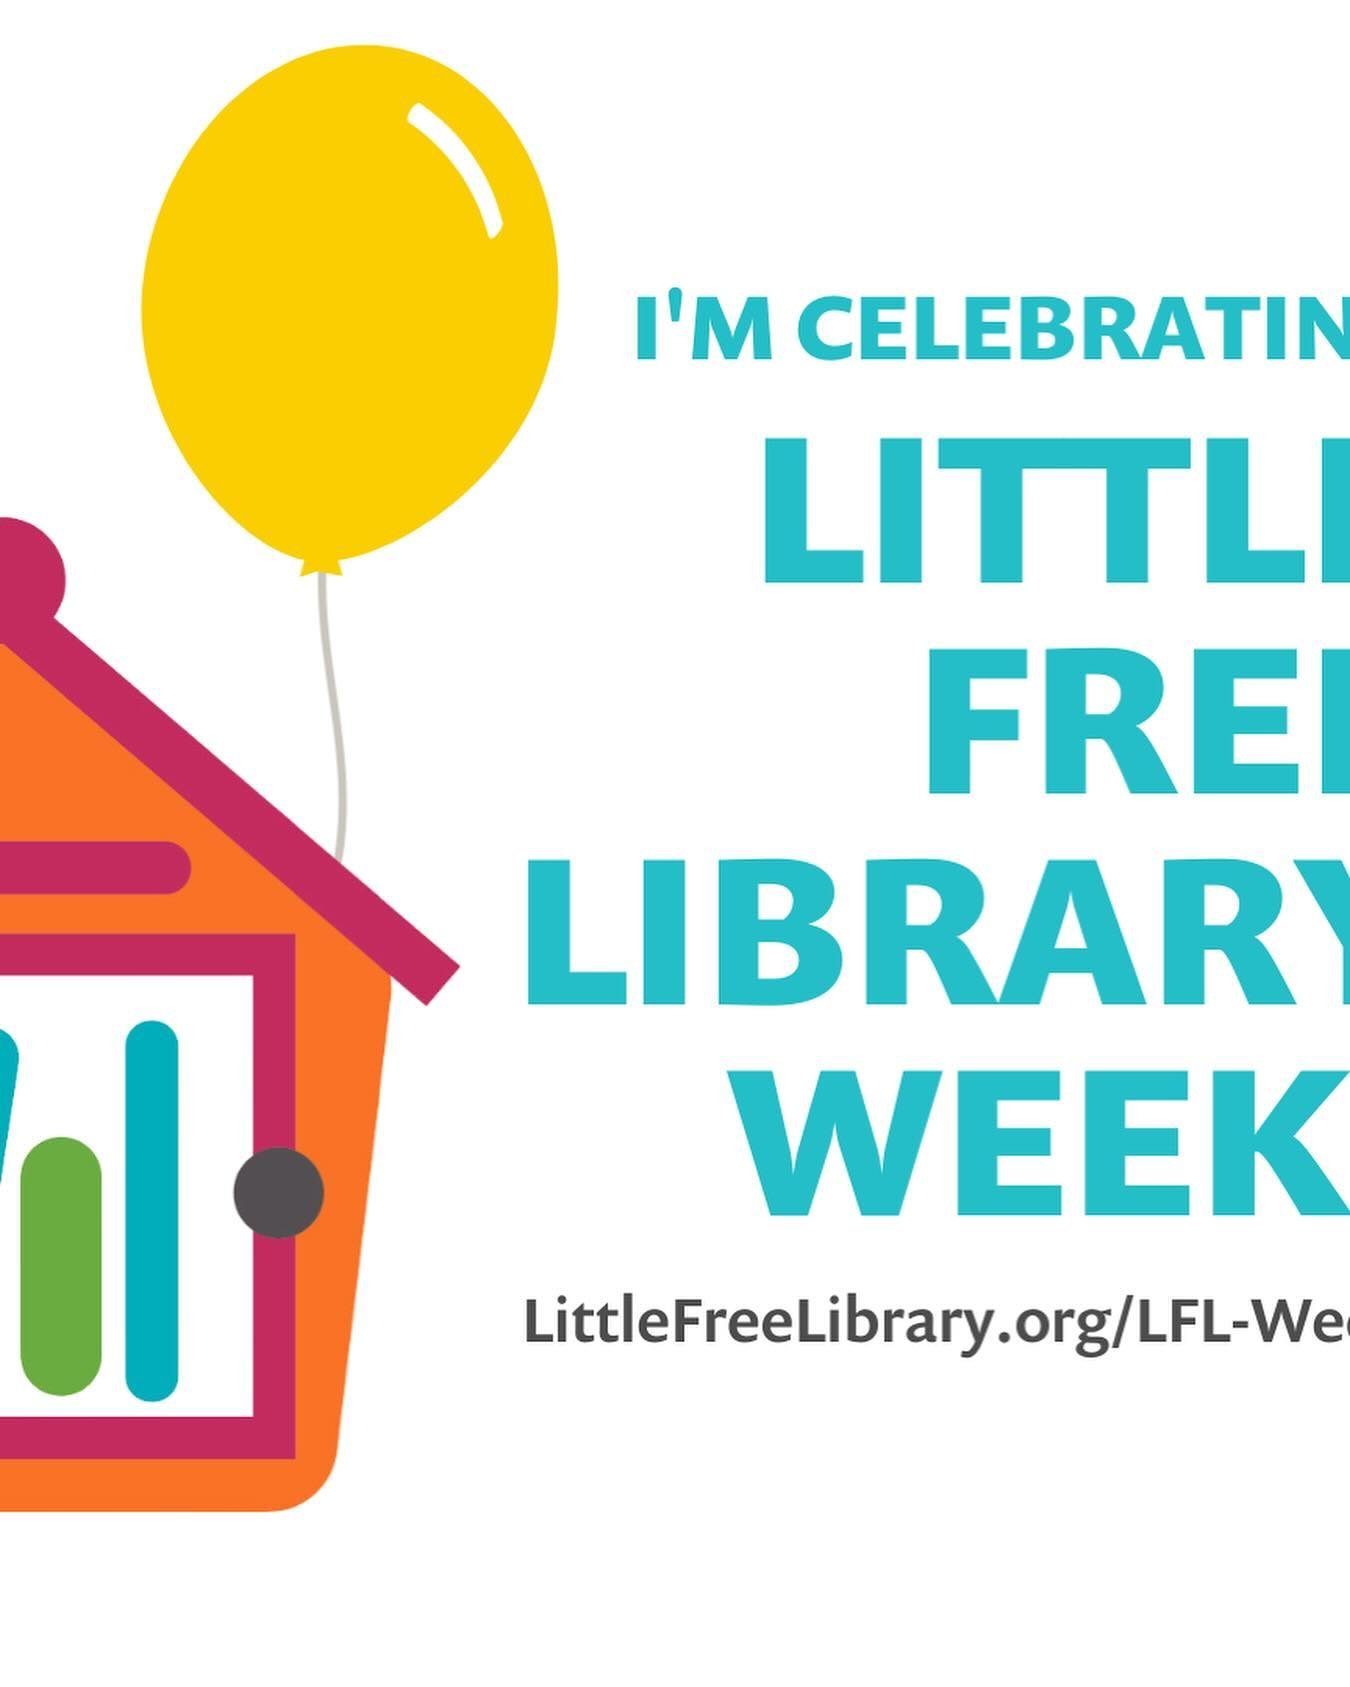 It&rsquo;s @littlefreelibrary 12th Birthday as a global nonprofit and I&rsquo;m joining in the celebrations this week!! You can too! If you&rsquo;ve experienced the joy of finding a little book house full of free books in your own neighborhood, you k